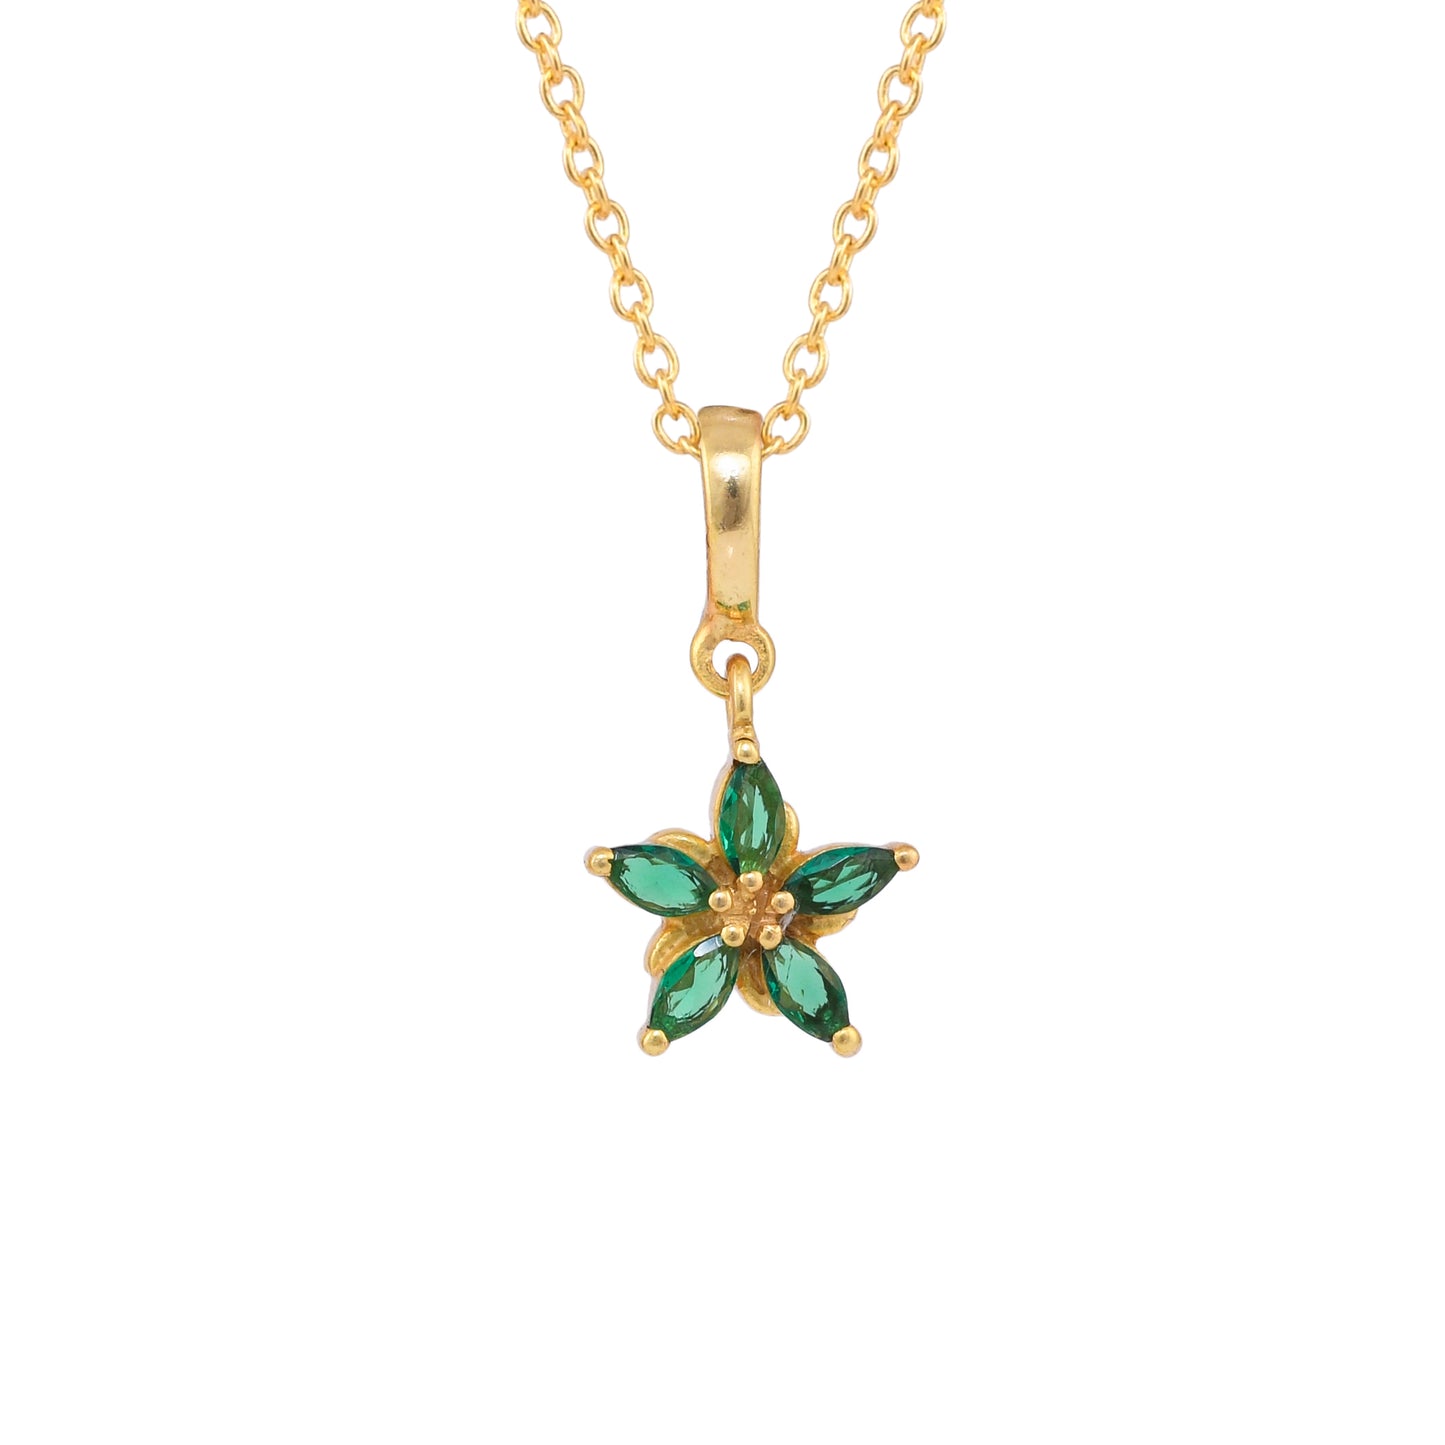 Green Cz Flower Silver Necklace - From Purl Purl